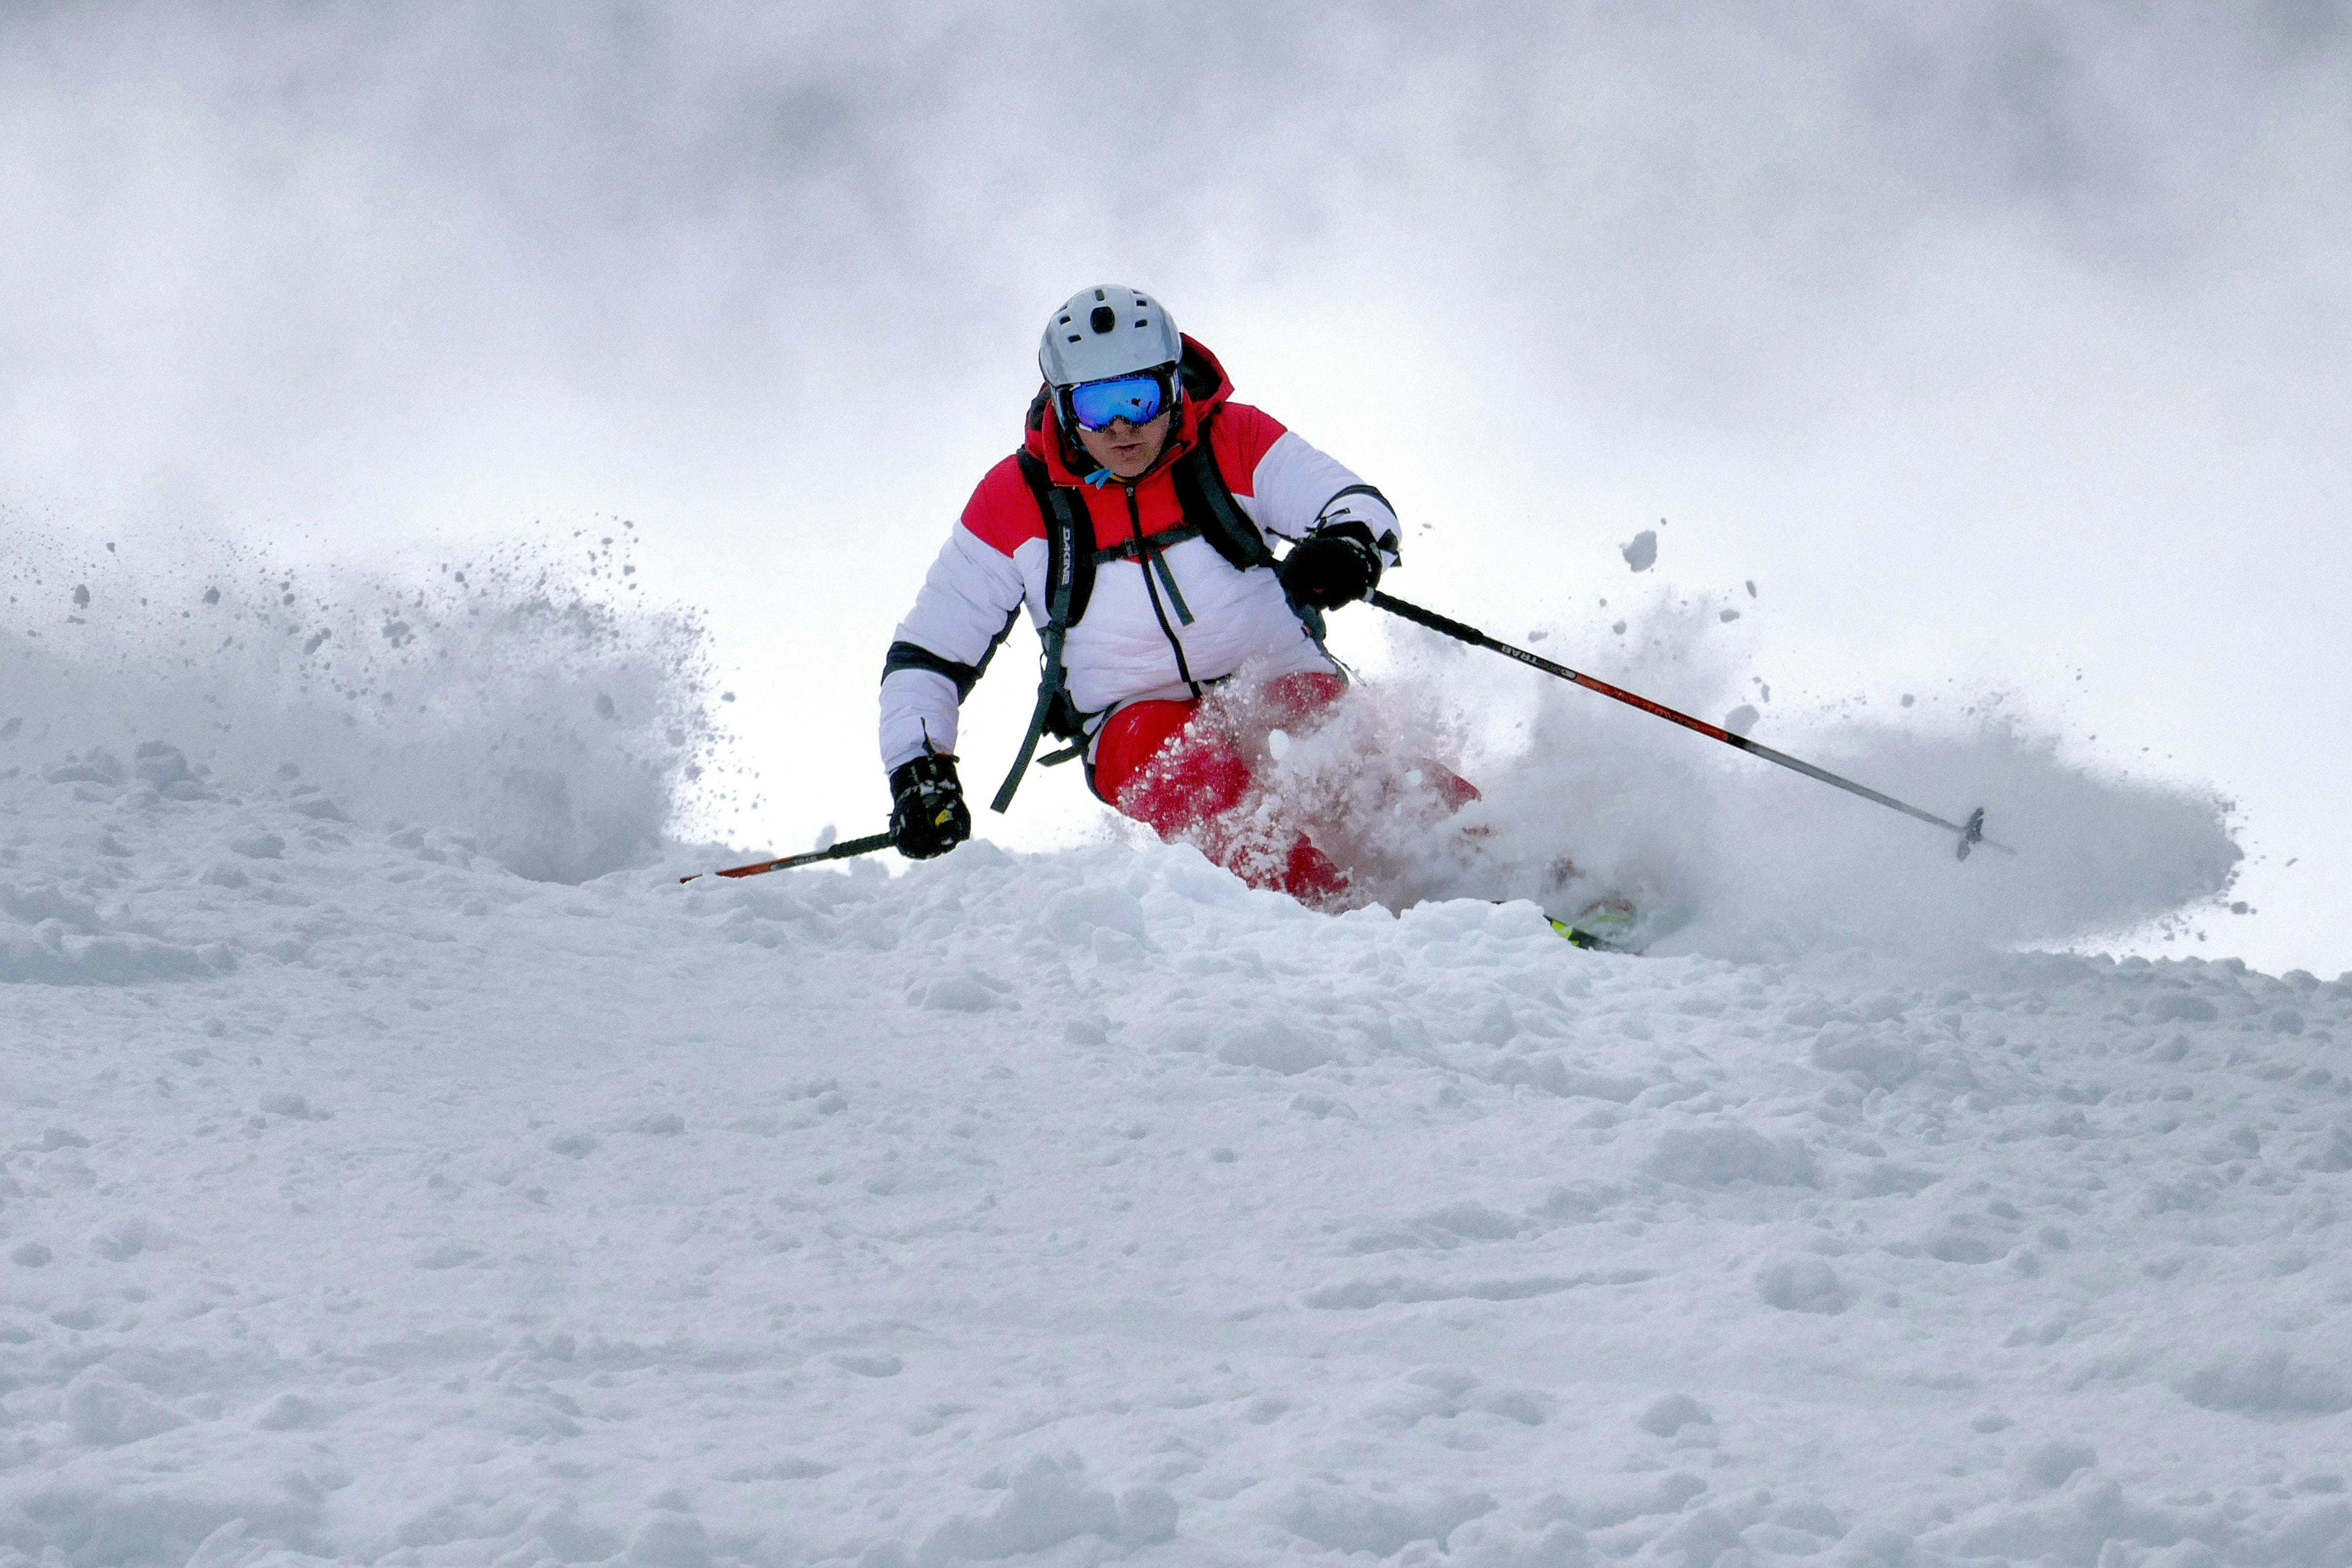 A skier in red and white executes a turn in chunky snow